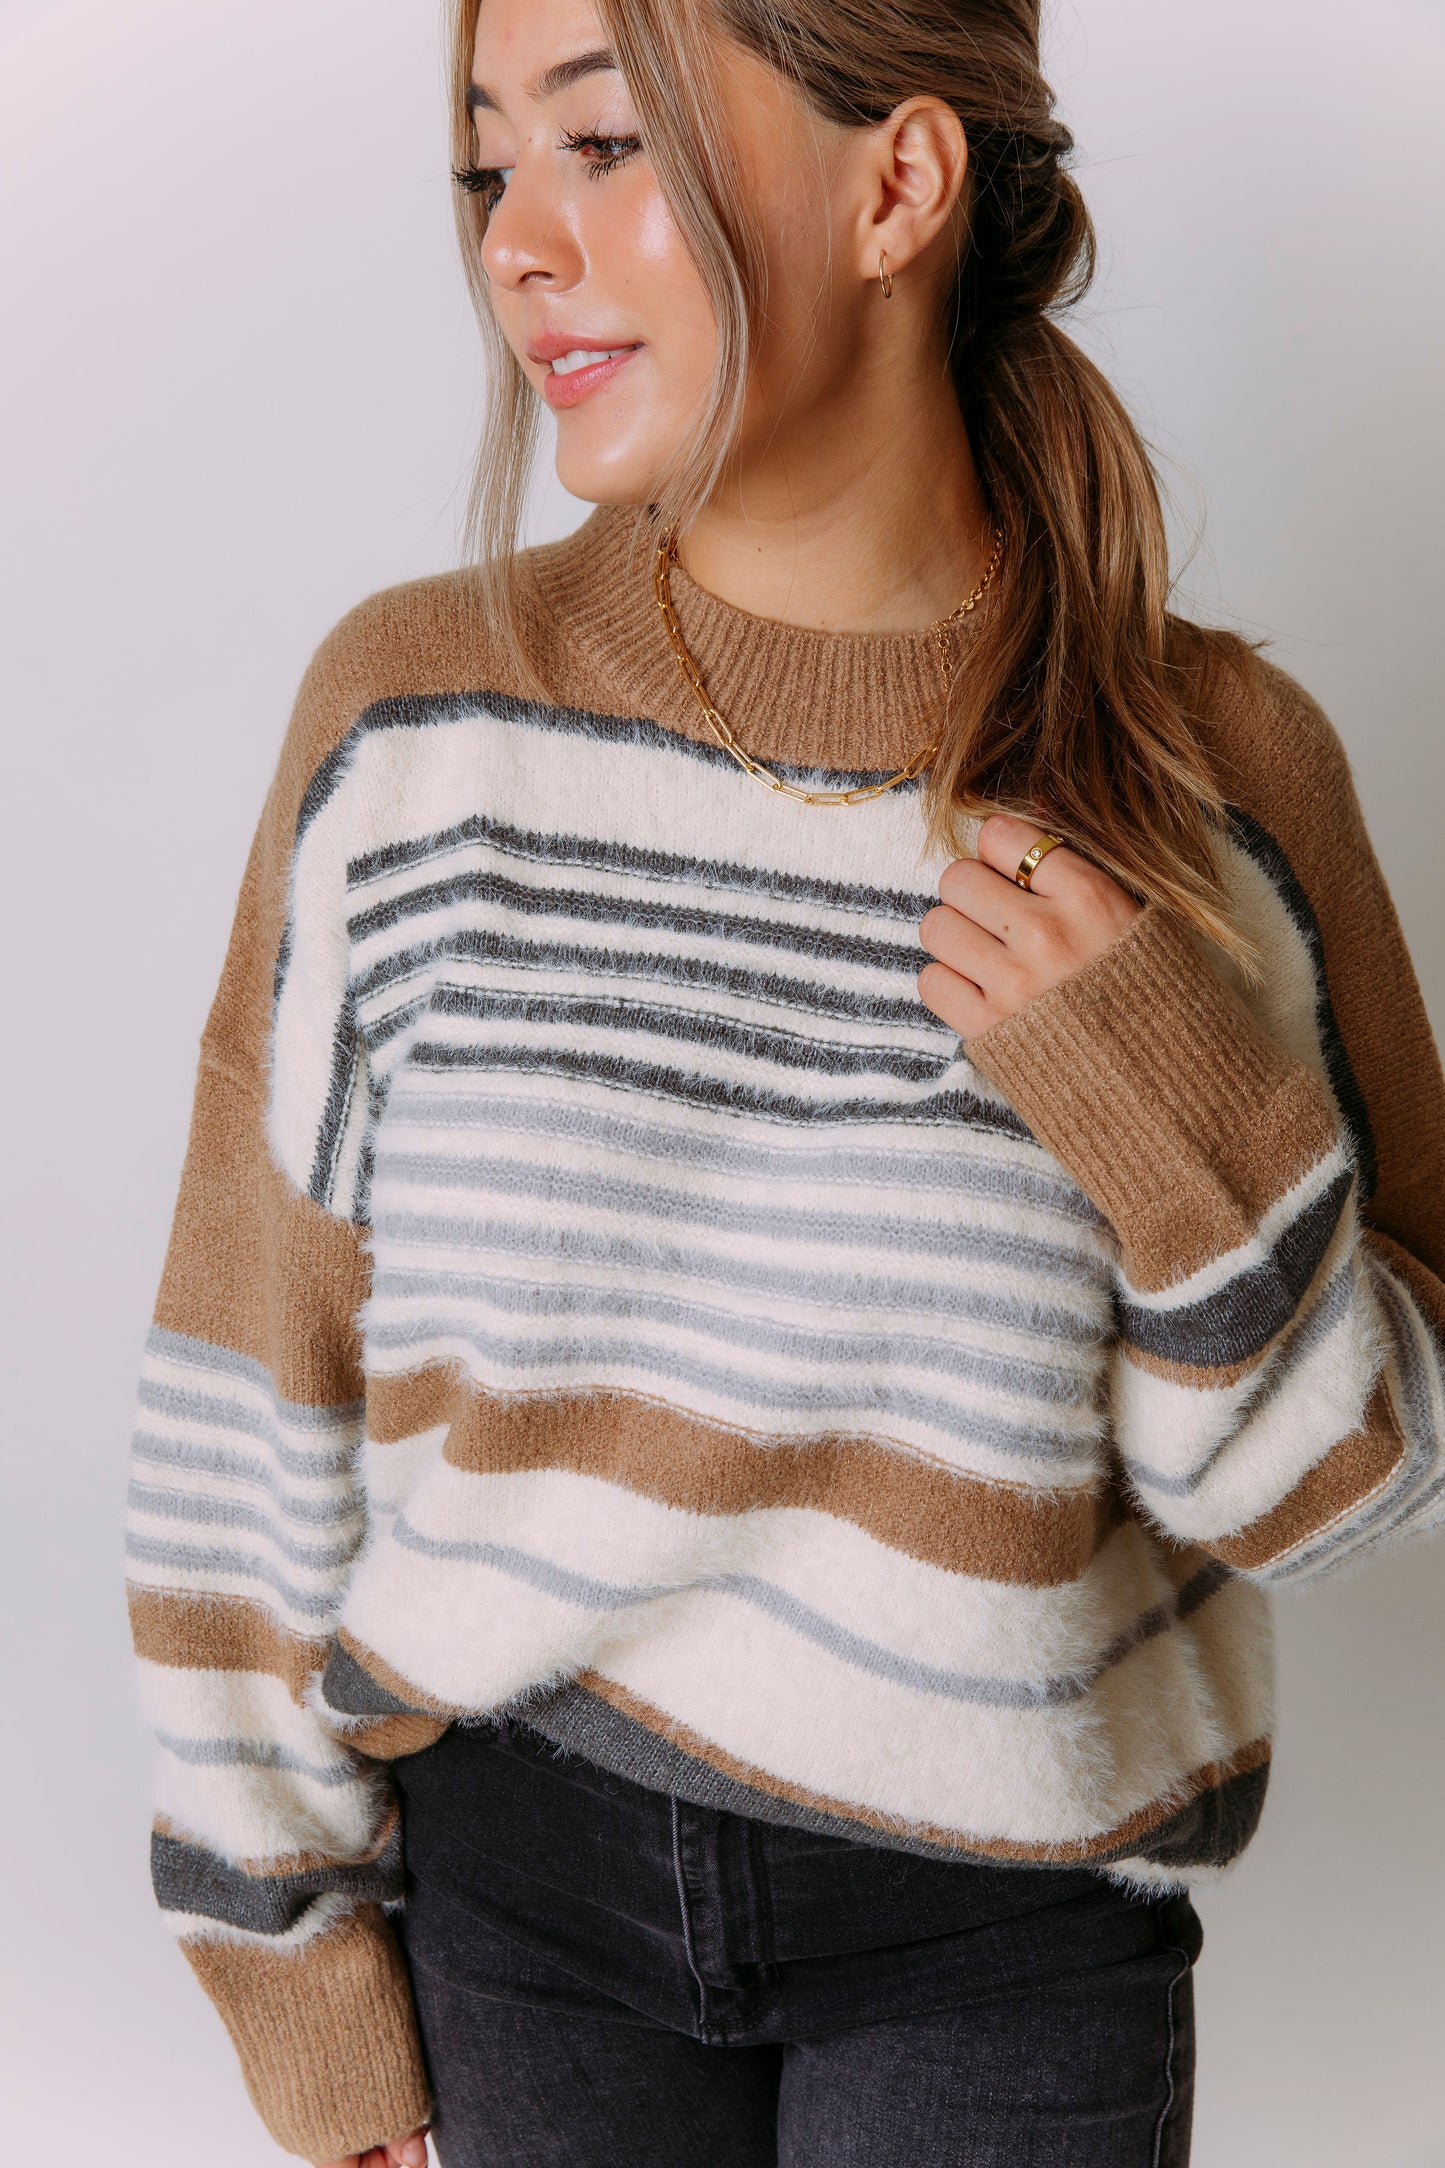 SWEATER WEATHER STRIPED SWEATER TOP